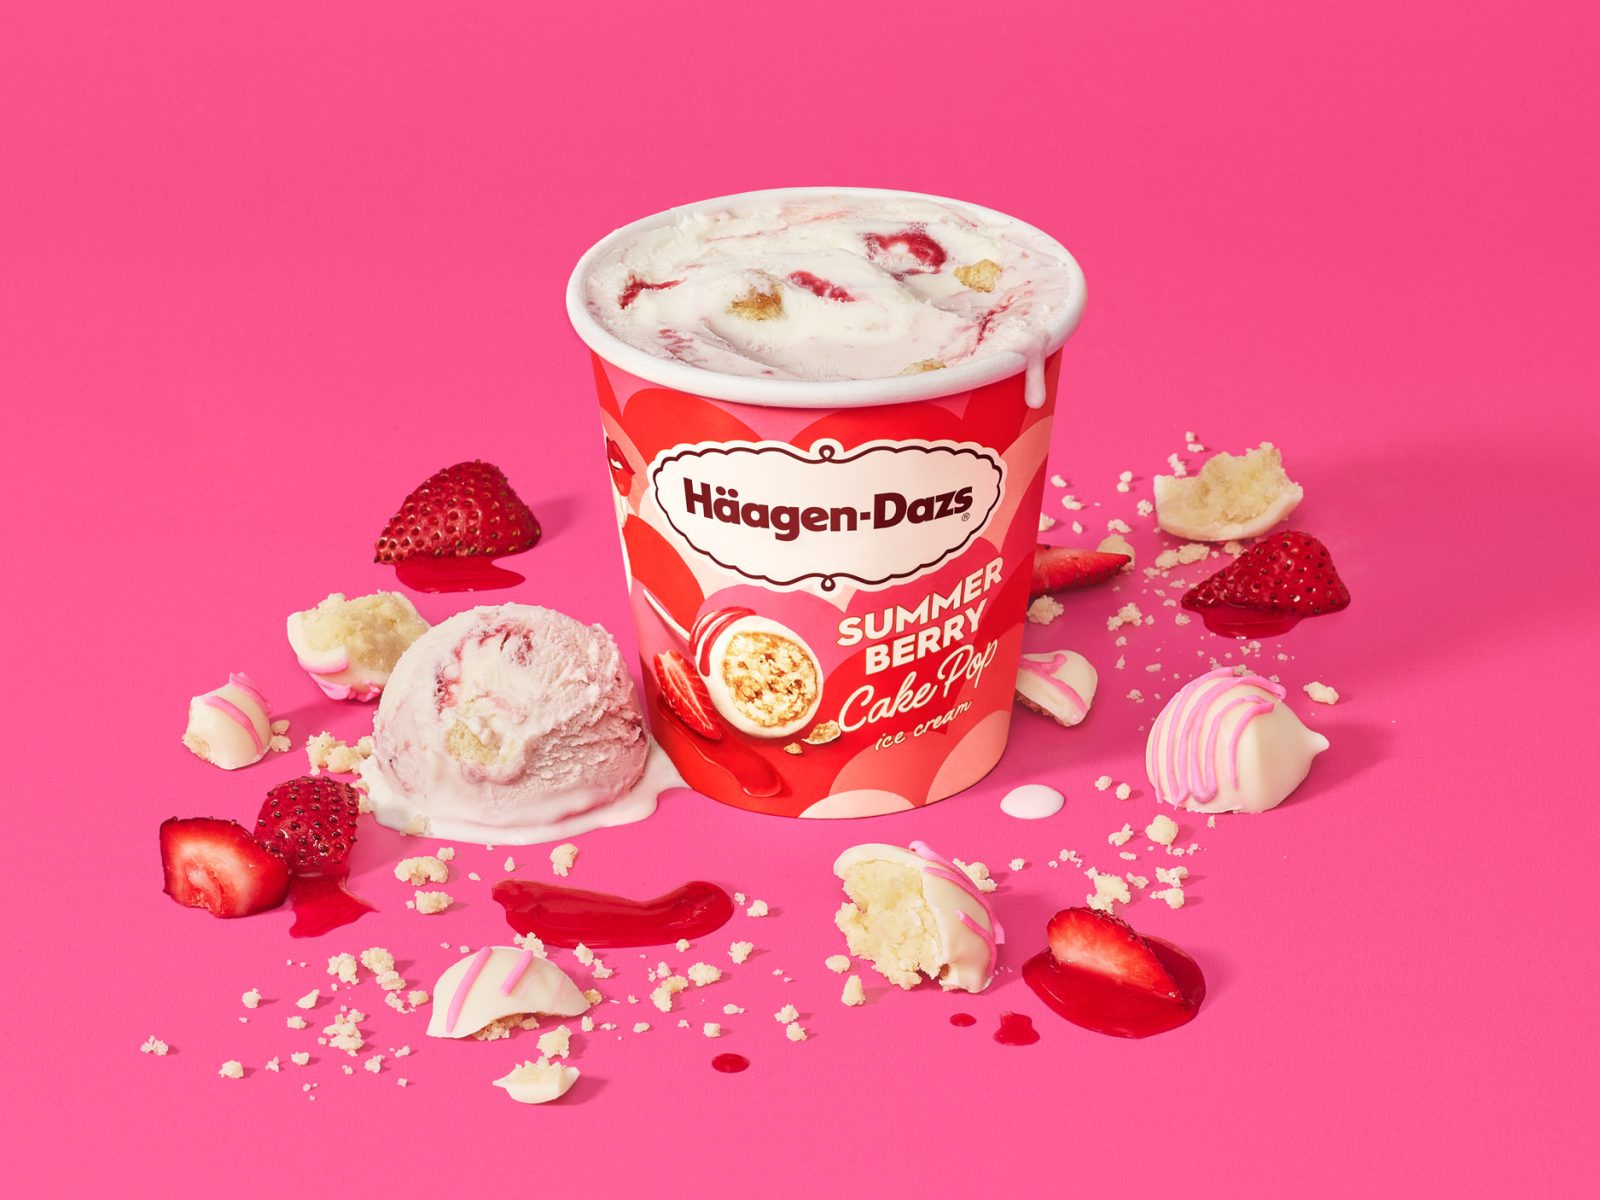 Häagen-Dazs Introduces New Ice Cream Flavors Inspired by City Street Food  Desserts